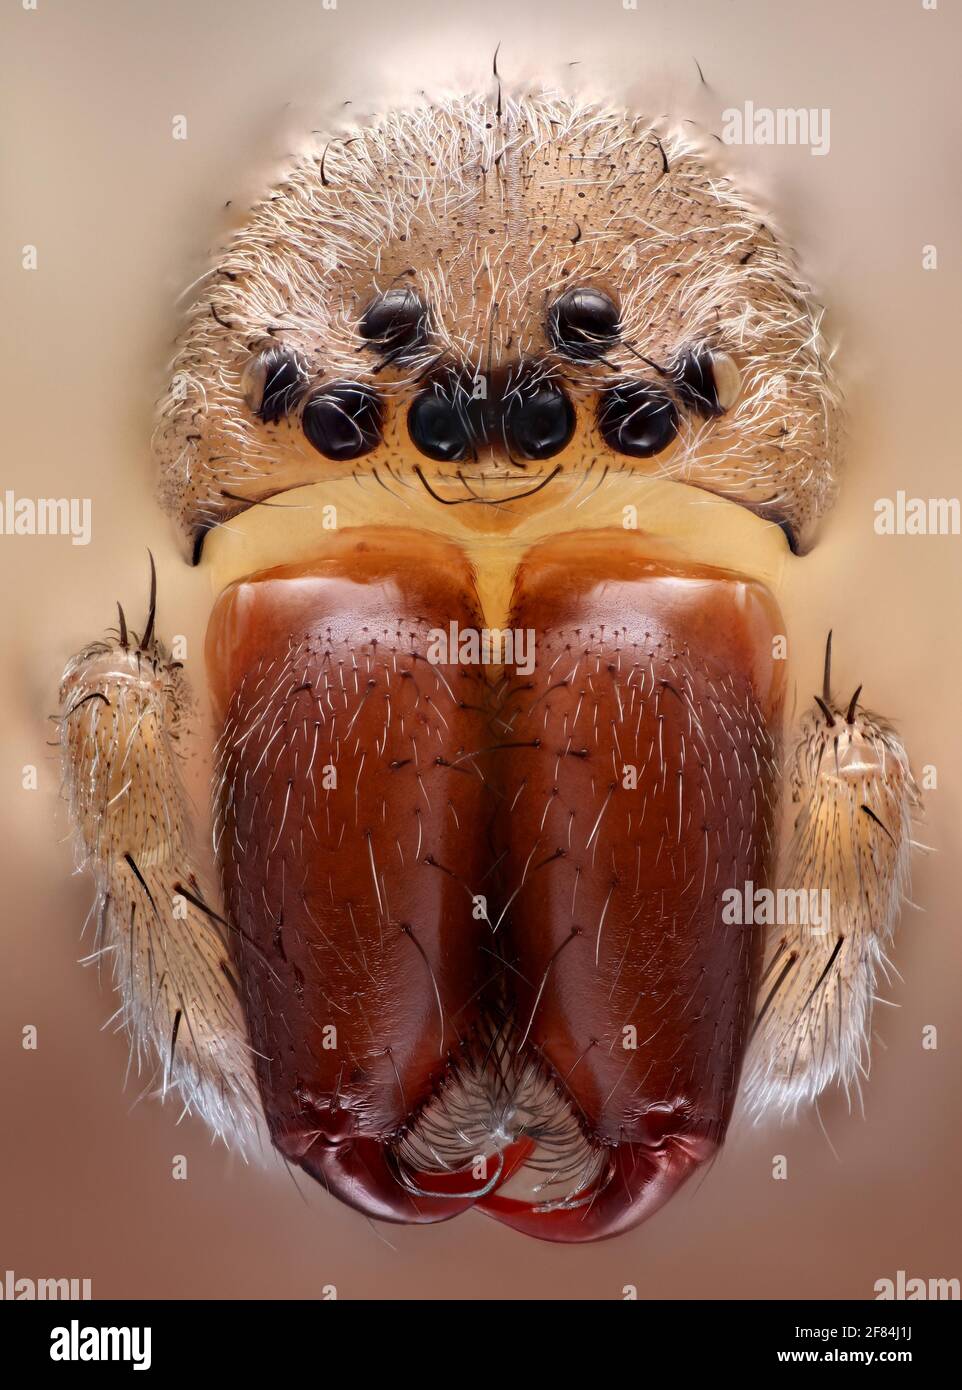 Frontal view of a house spider (Tegenaria) with its distinctive jaw claws Stock Photo